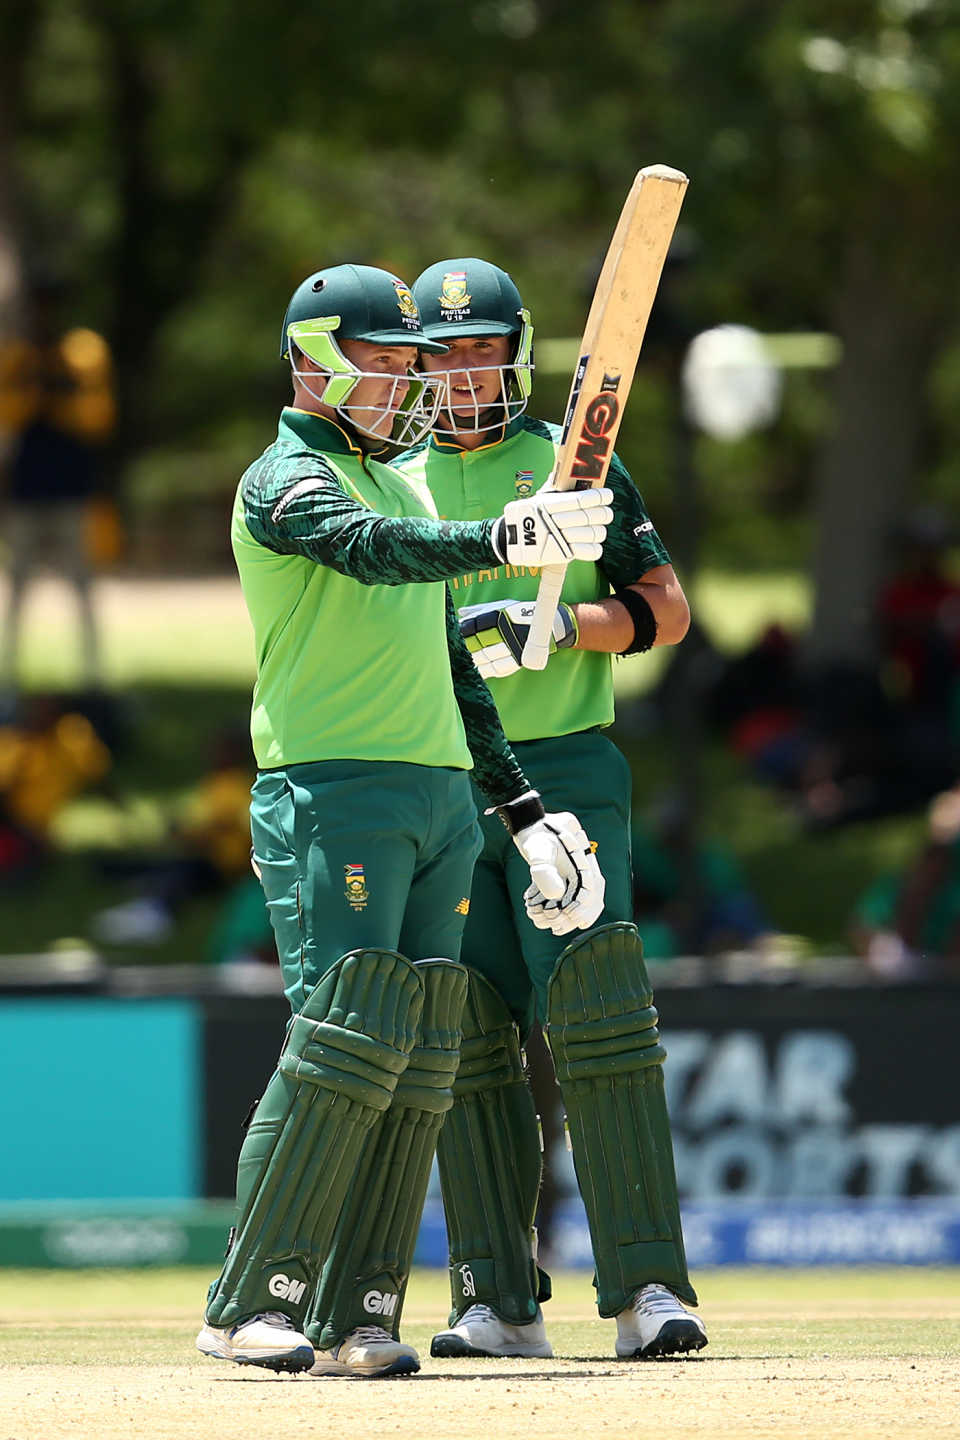 Bryce Parsons and Luke Beaufort added 152 for the third wicket, South Africa v UAE, Under-19 World Cup, Group D, Bloemfontein, January 25, 2019